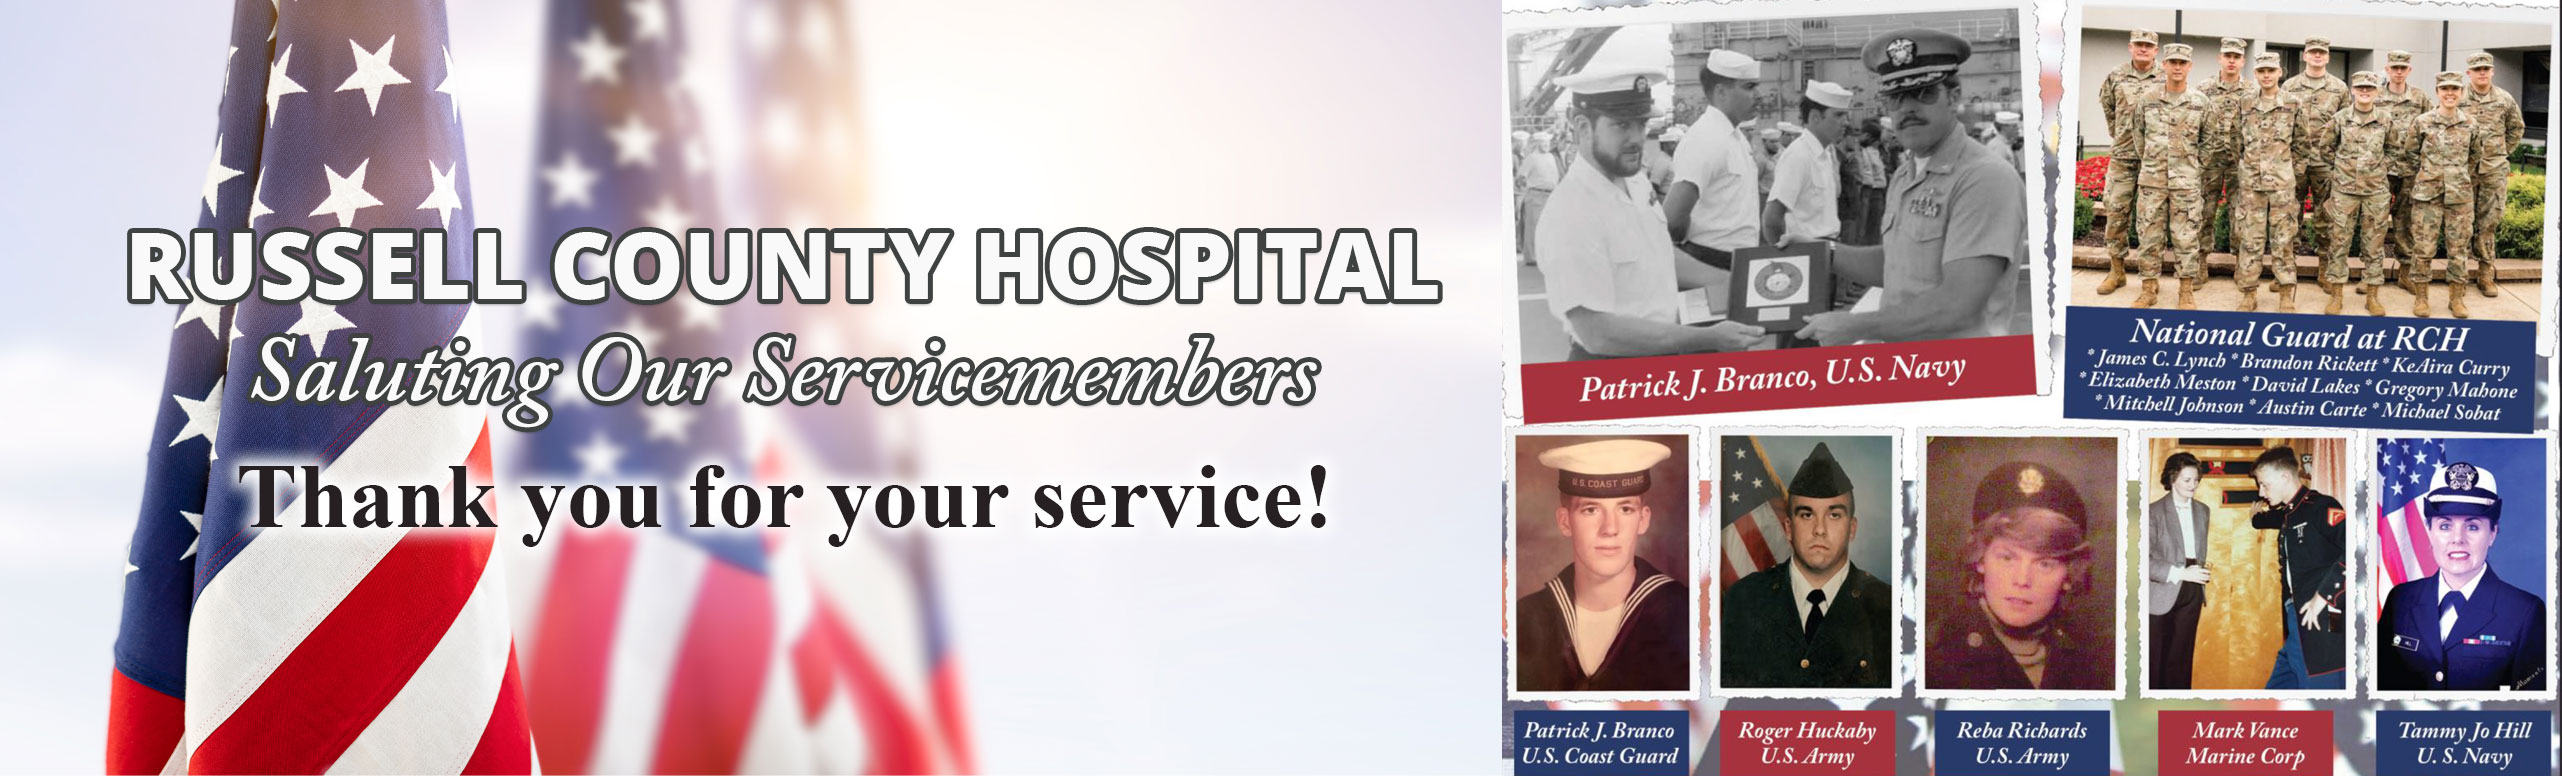 Banner picture of three American Flags and a collage of Service Members.

Patrick J. Branco, U.S. Navy
Patrick J. Branco, U.S. Coast Guard
Roger Huckaby U.S. Army
Reba Richards, U.S. Army
Mark Vance, Marine Corp
Tammy Jo Hill, U.S. Navy

National Guard at RCH
*James C. Lynch
*Brandon Rickett
*KeAira Curry
*Elizabeth Metson
*David Lakes
*Gregory Mabone
*Mitchell Johnson
*Austin Carte
*Michael Sobat

RUSSELL COUNTY HOSPITAL

Saluting Our Servicemembers
Thank you for your service!